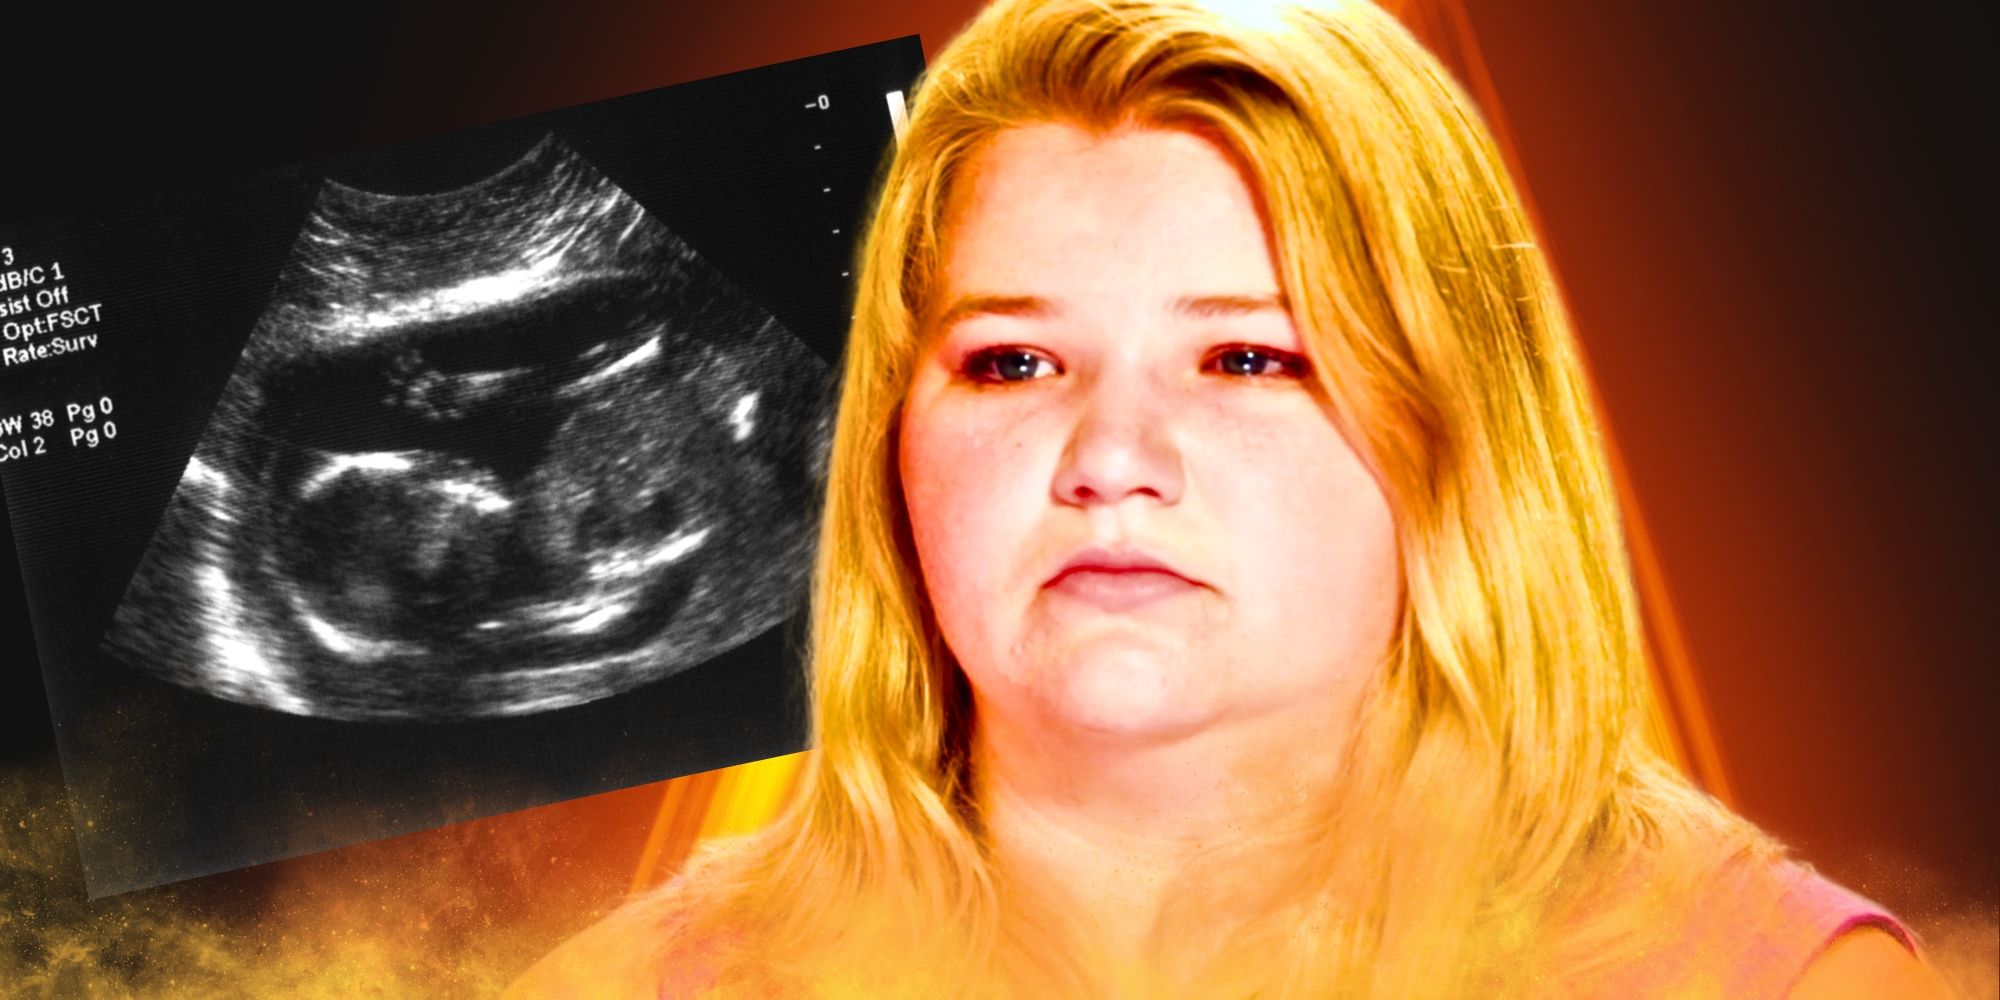 90 Day Fiancé’s Nicole Nafziger looking emotional, with sonogram behind her